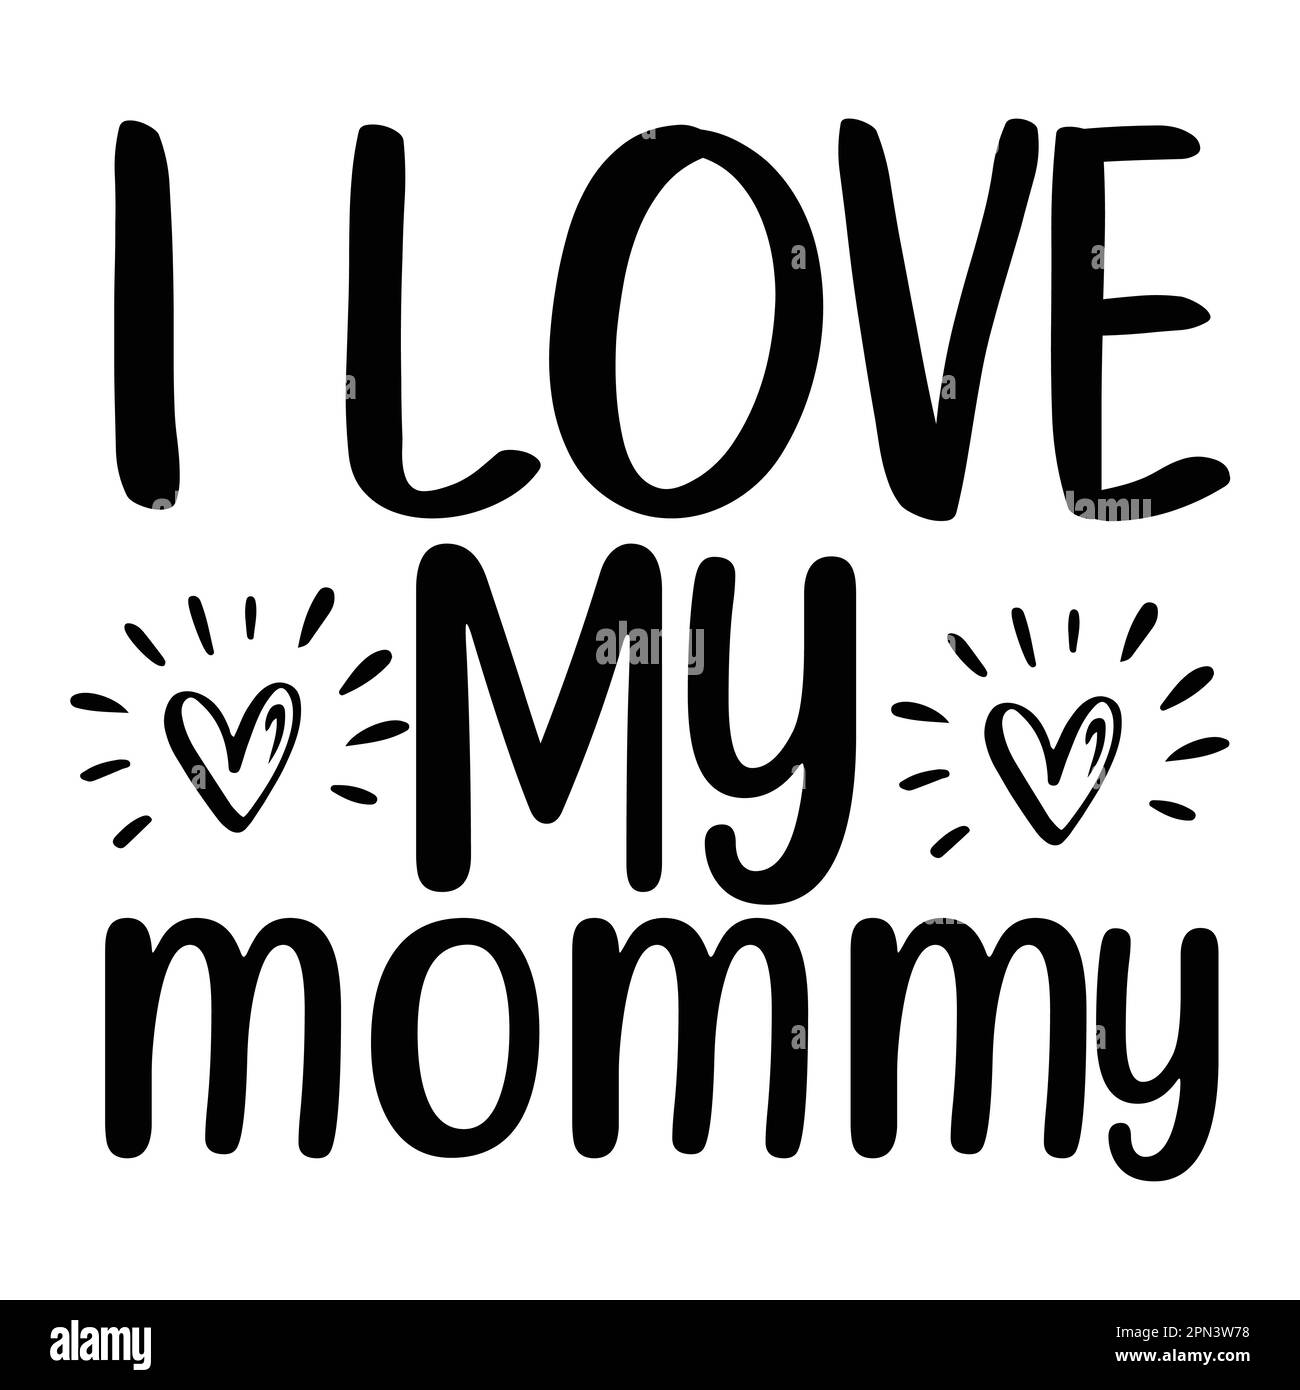 I Love My Mommy, Mother's Day typography shirt design for mother lover mom mommy mama Handmade calligraphy vector illustration Silhouette Stock Vector